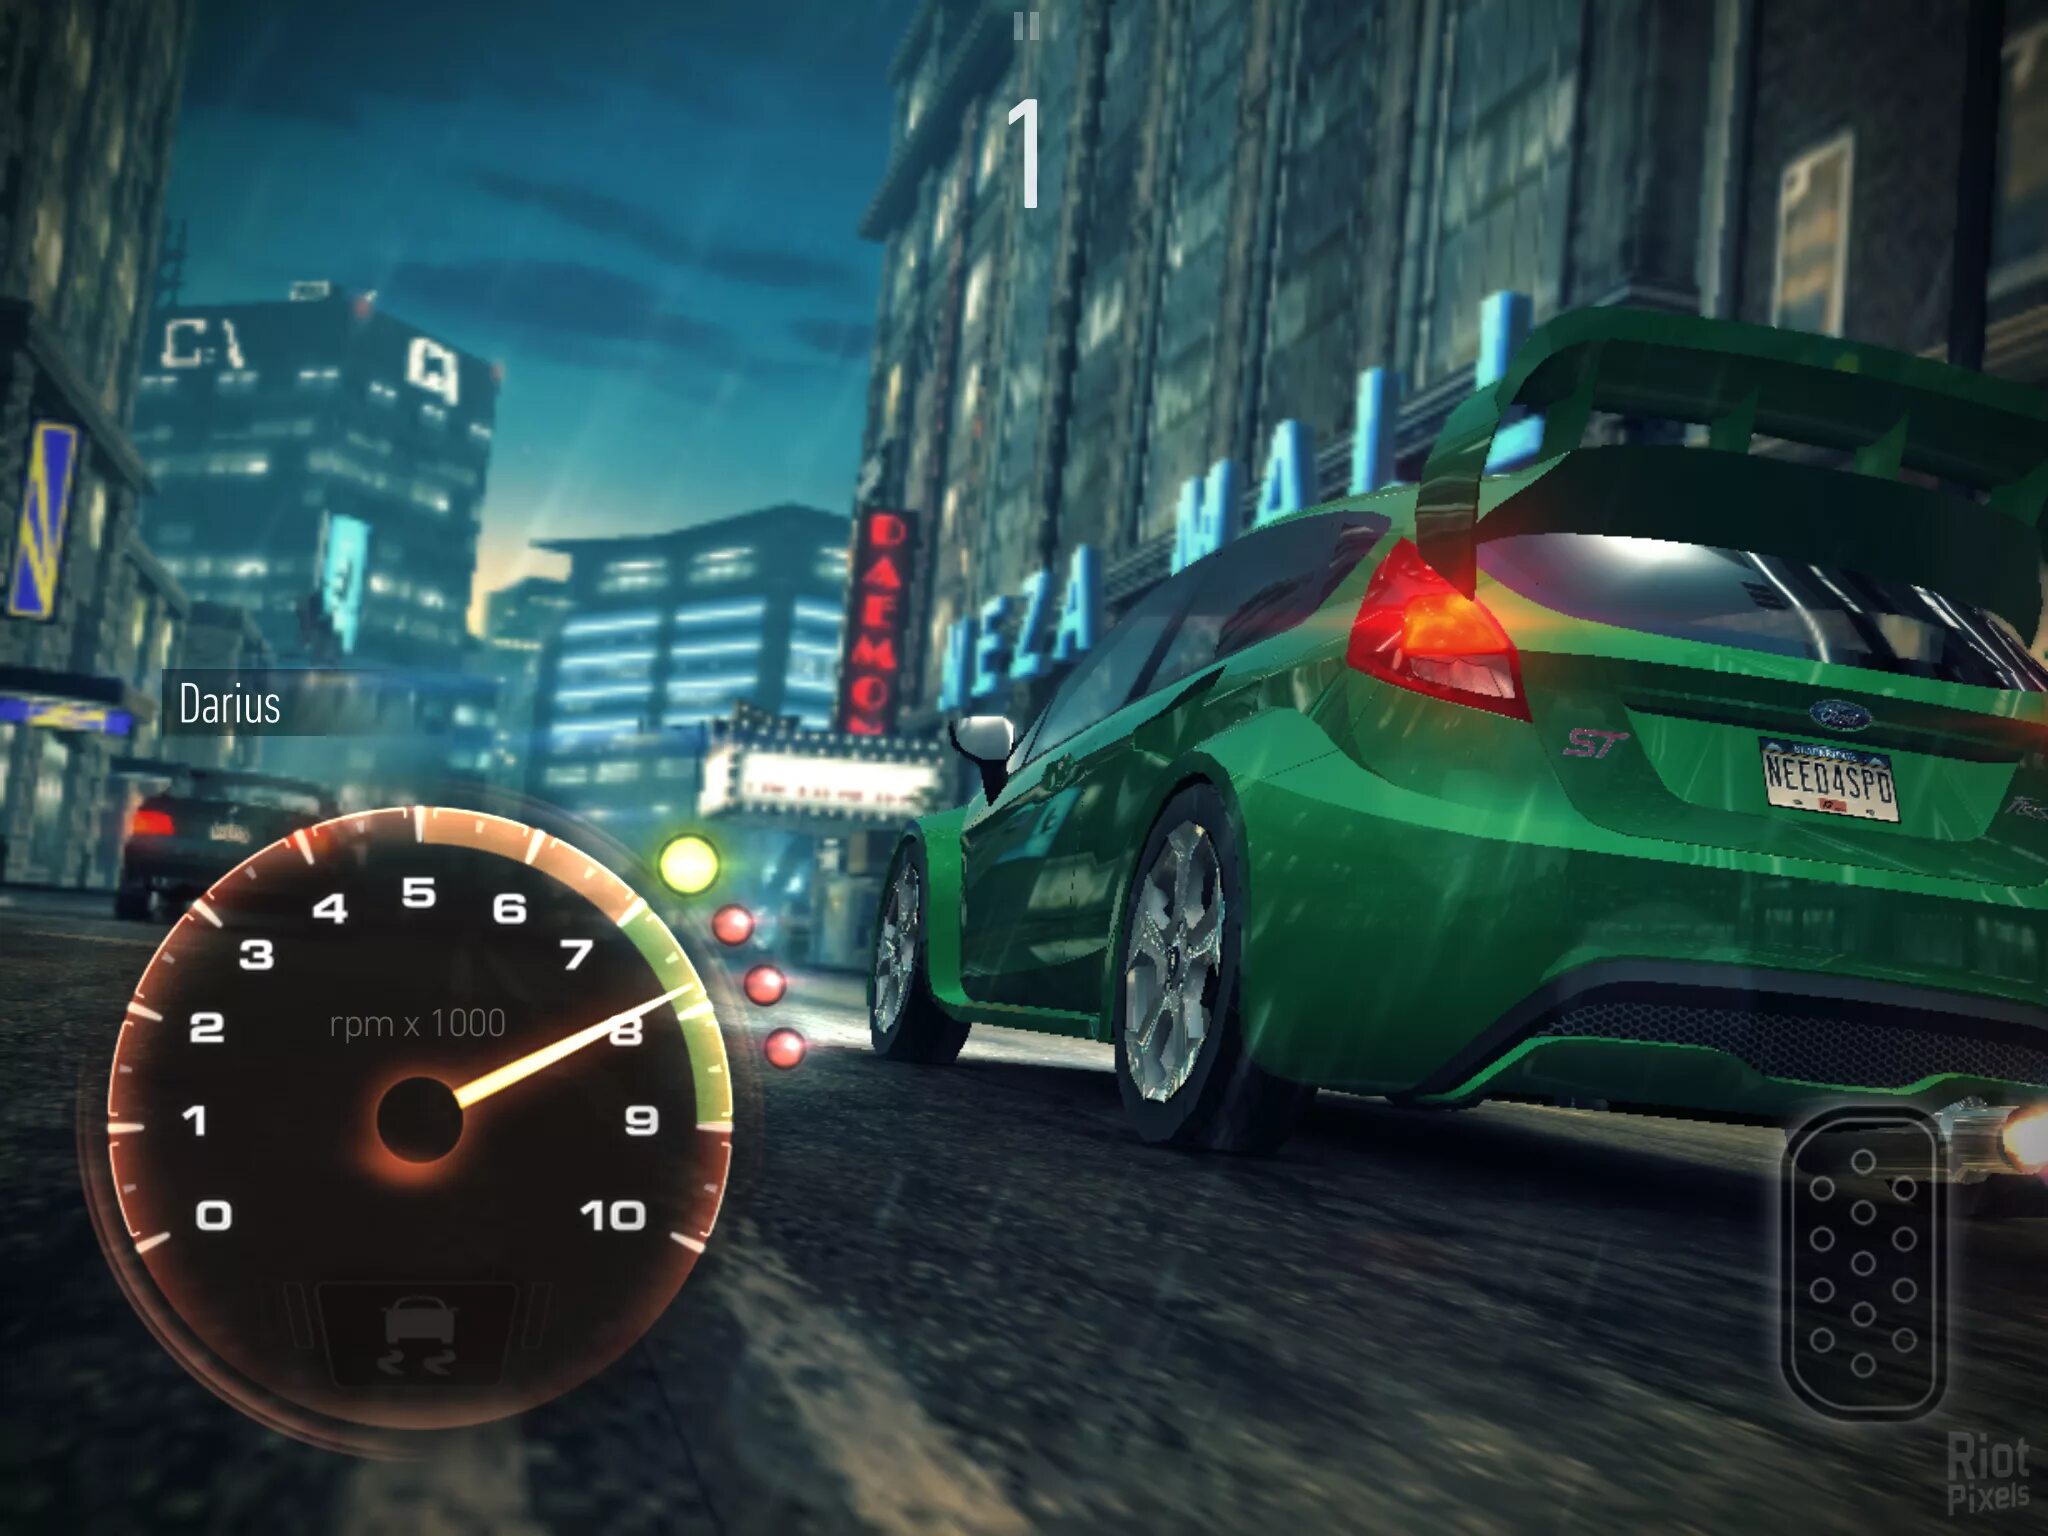 Need for Speed no limits. Игра NFS no limits. Need for Speed nl гонки. Нфс no limits. Новая игра need for speed